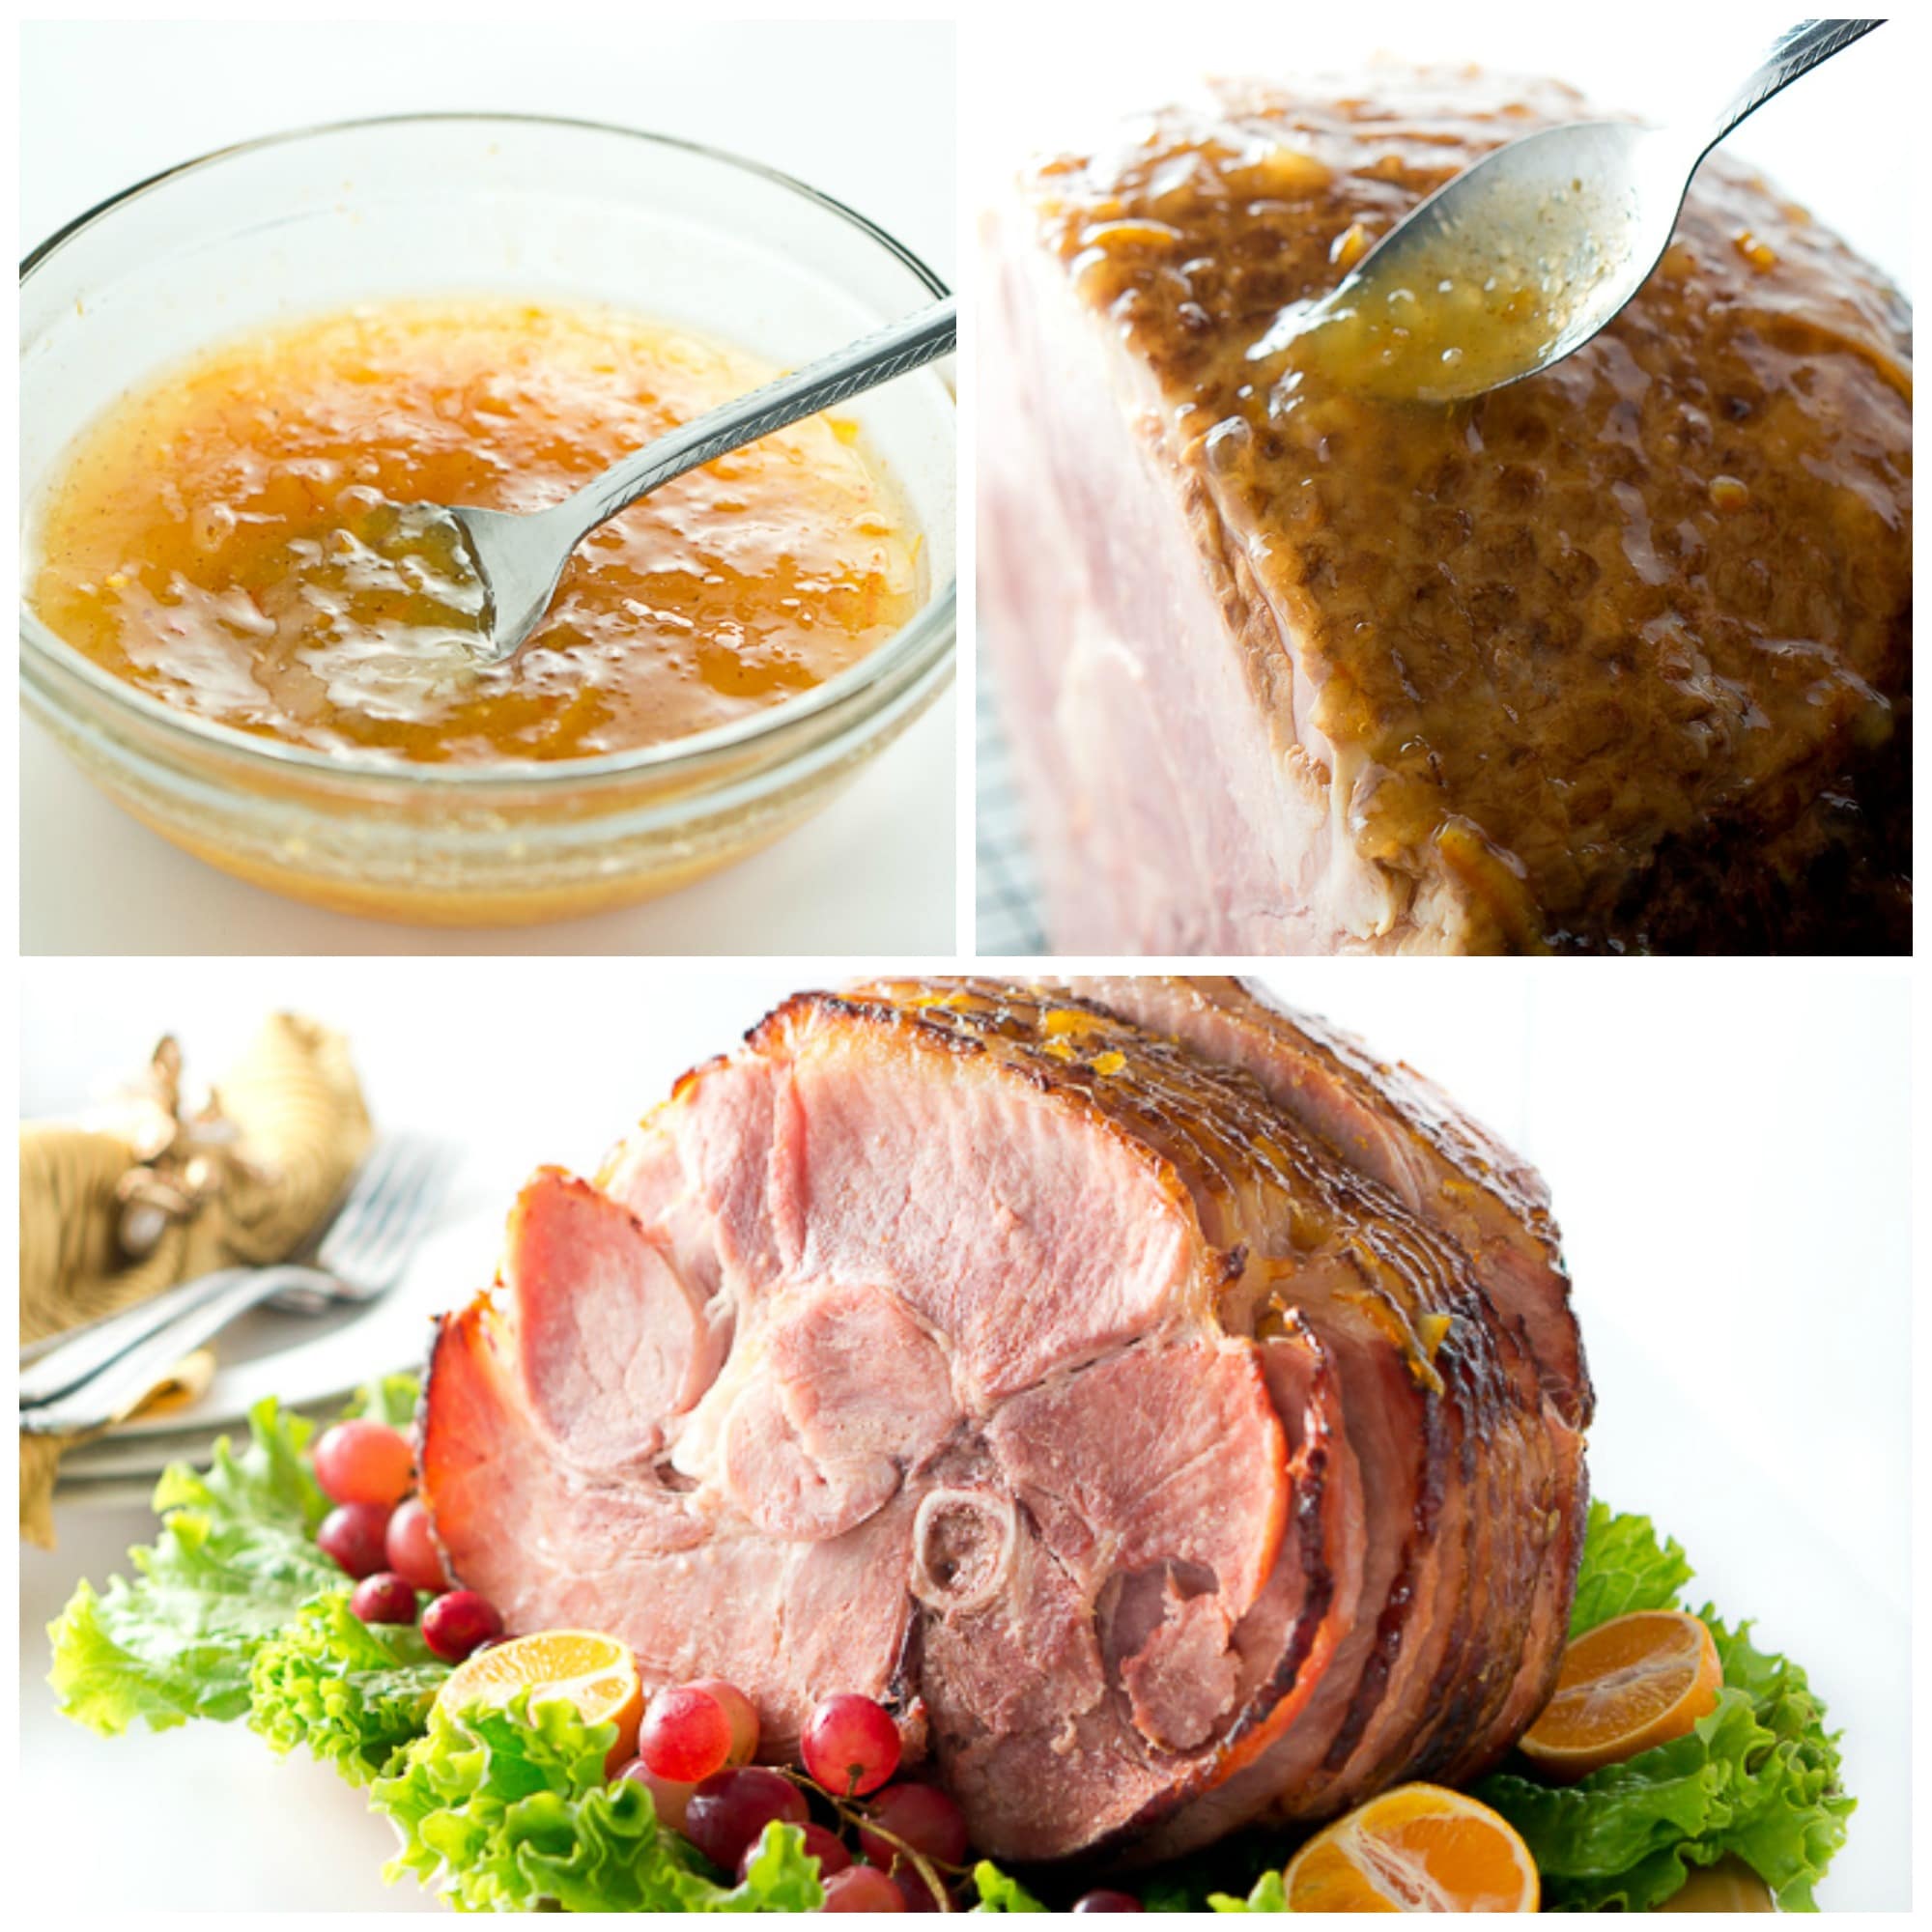 Orange Dijon Glazed Ham - Succulent spiral ham is brushed with a sweet and tangy orange dijon glaze, then roasted until perfection, creating a delicious caramelized outer layer.